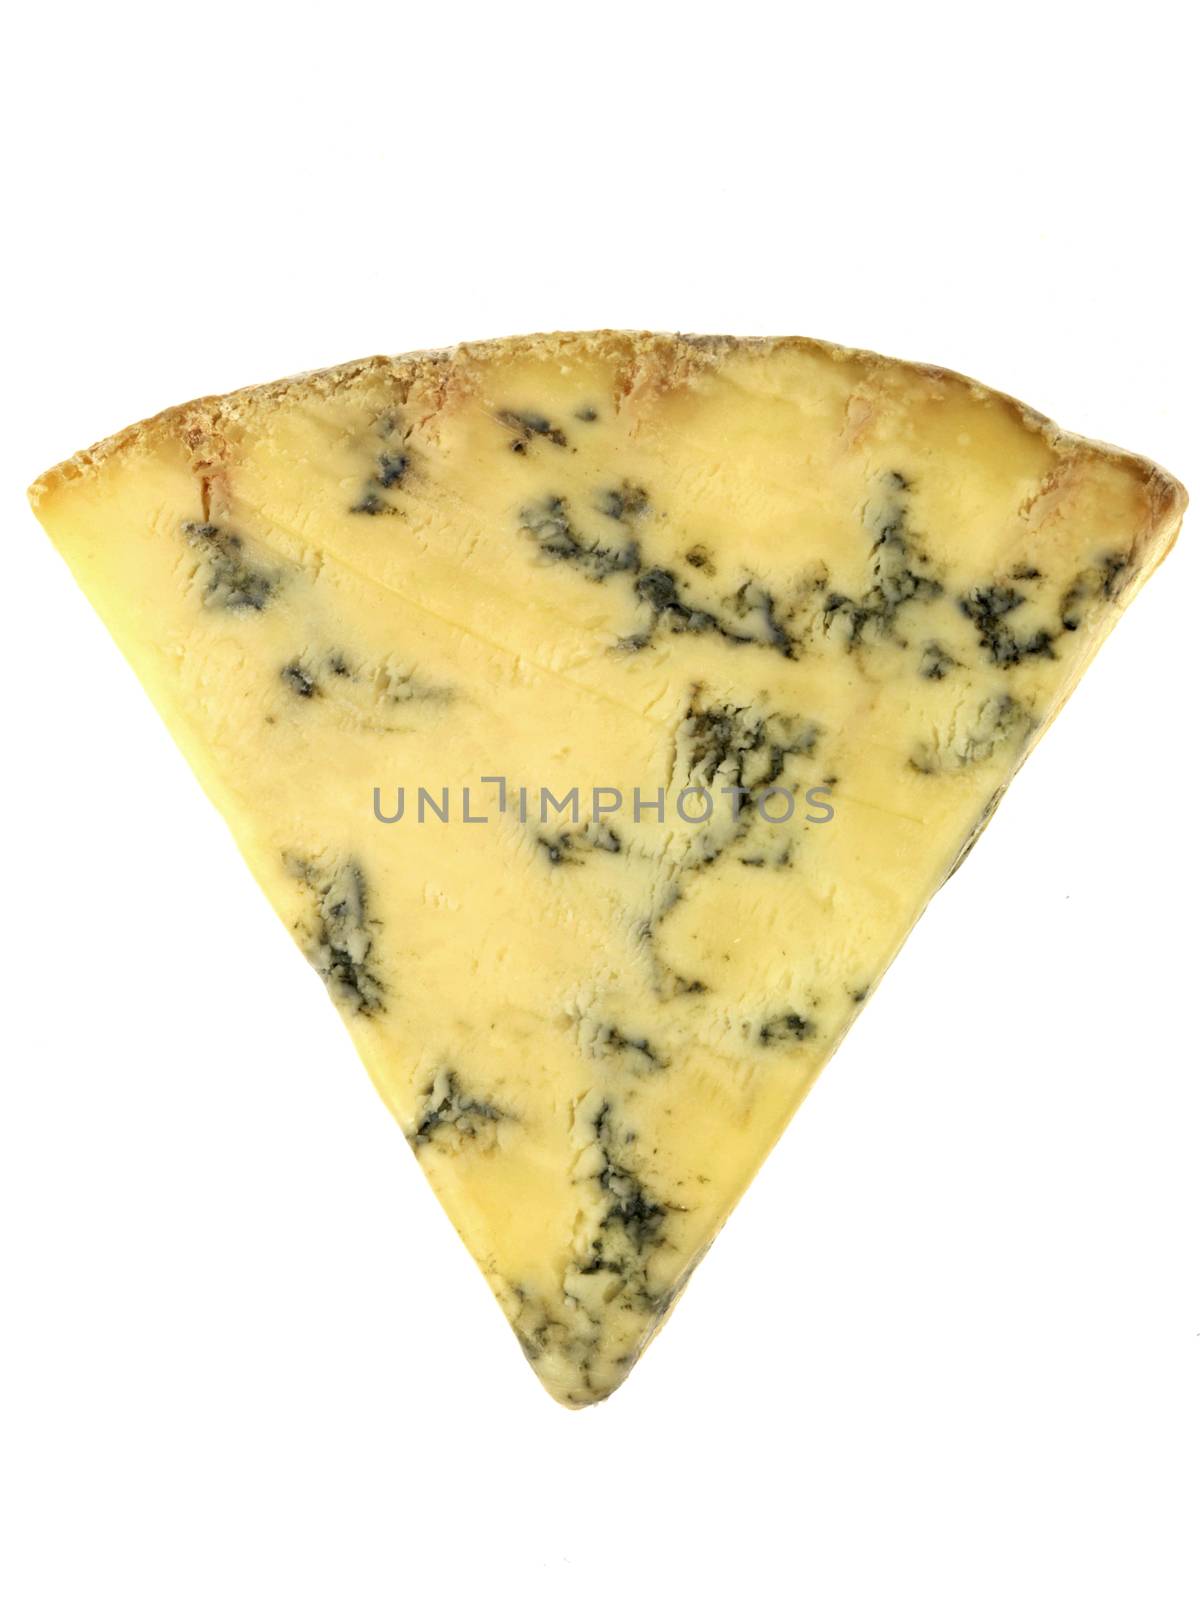 Stilton Cheese Dairy Product Wedge Isolated White Background